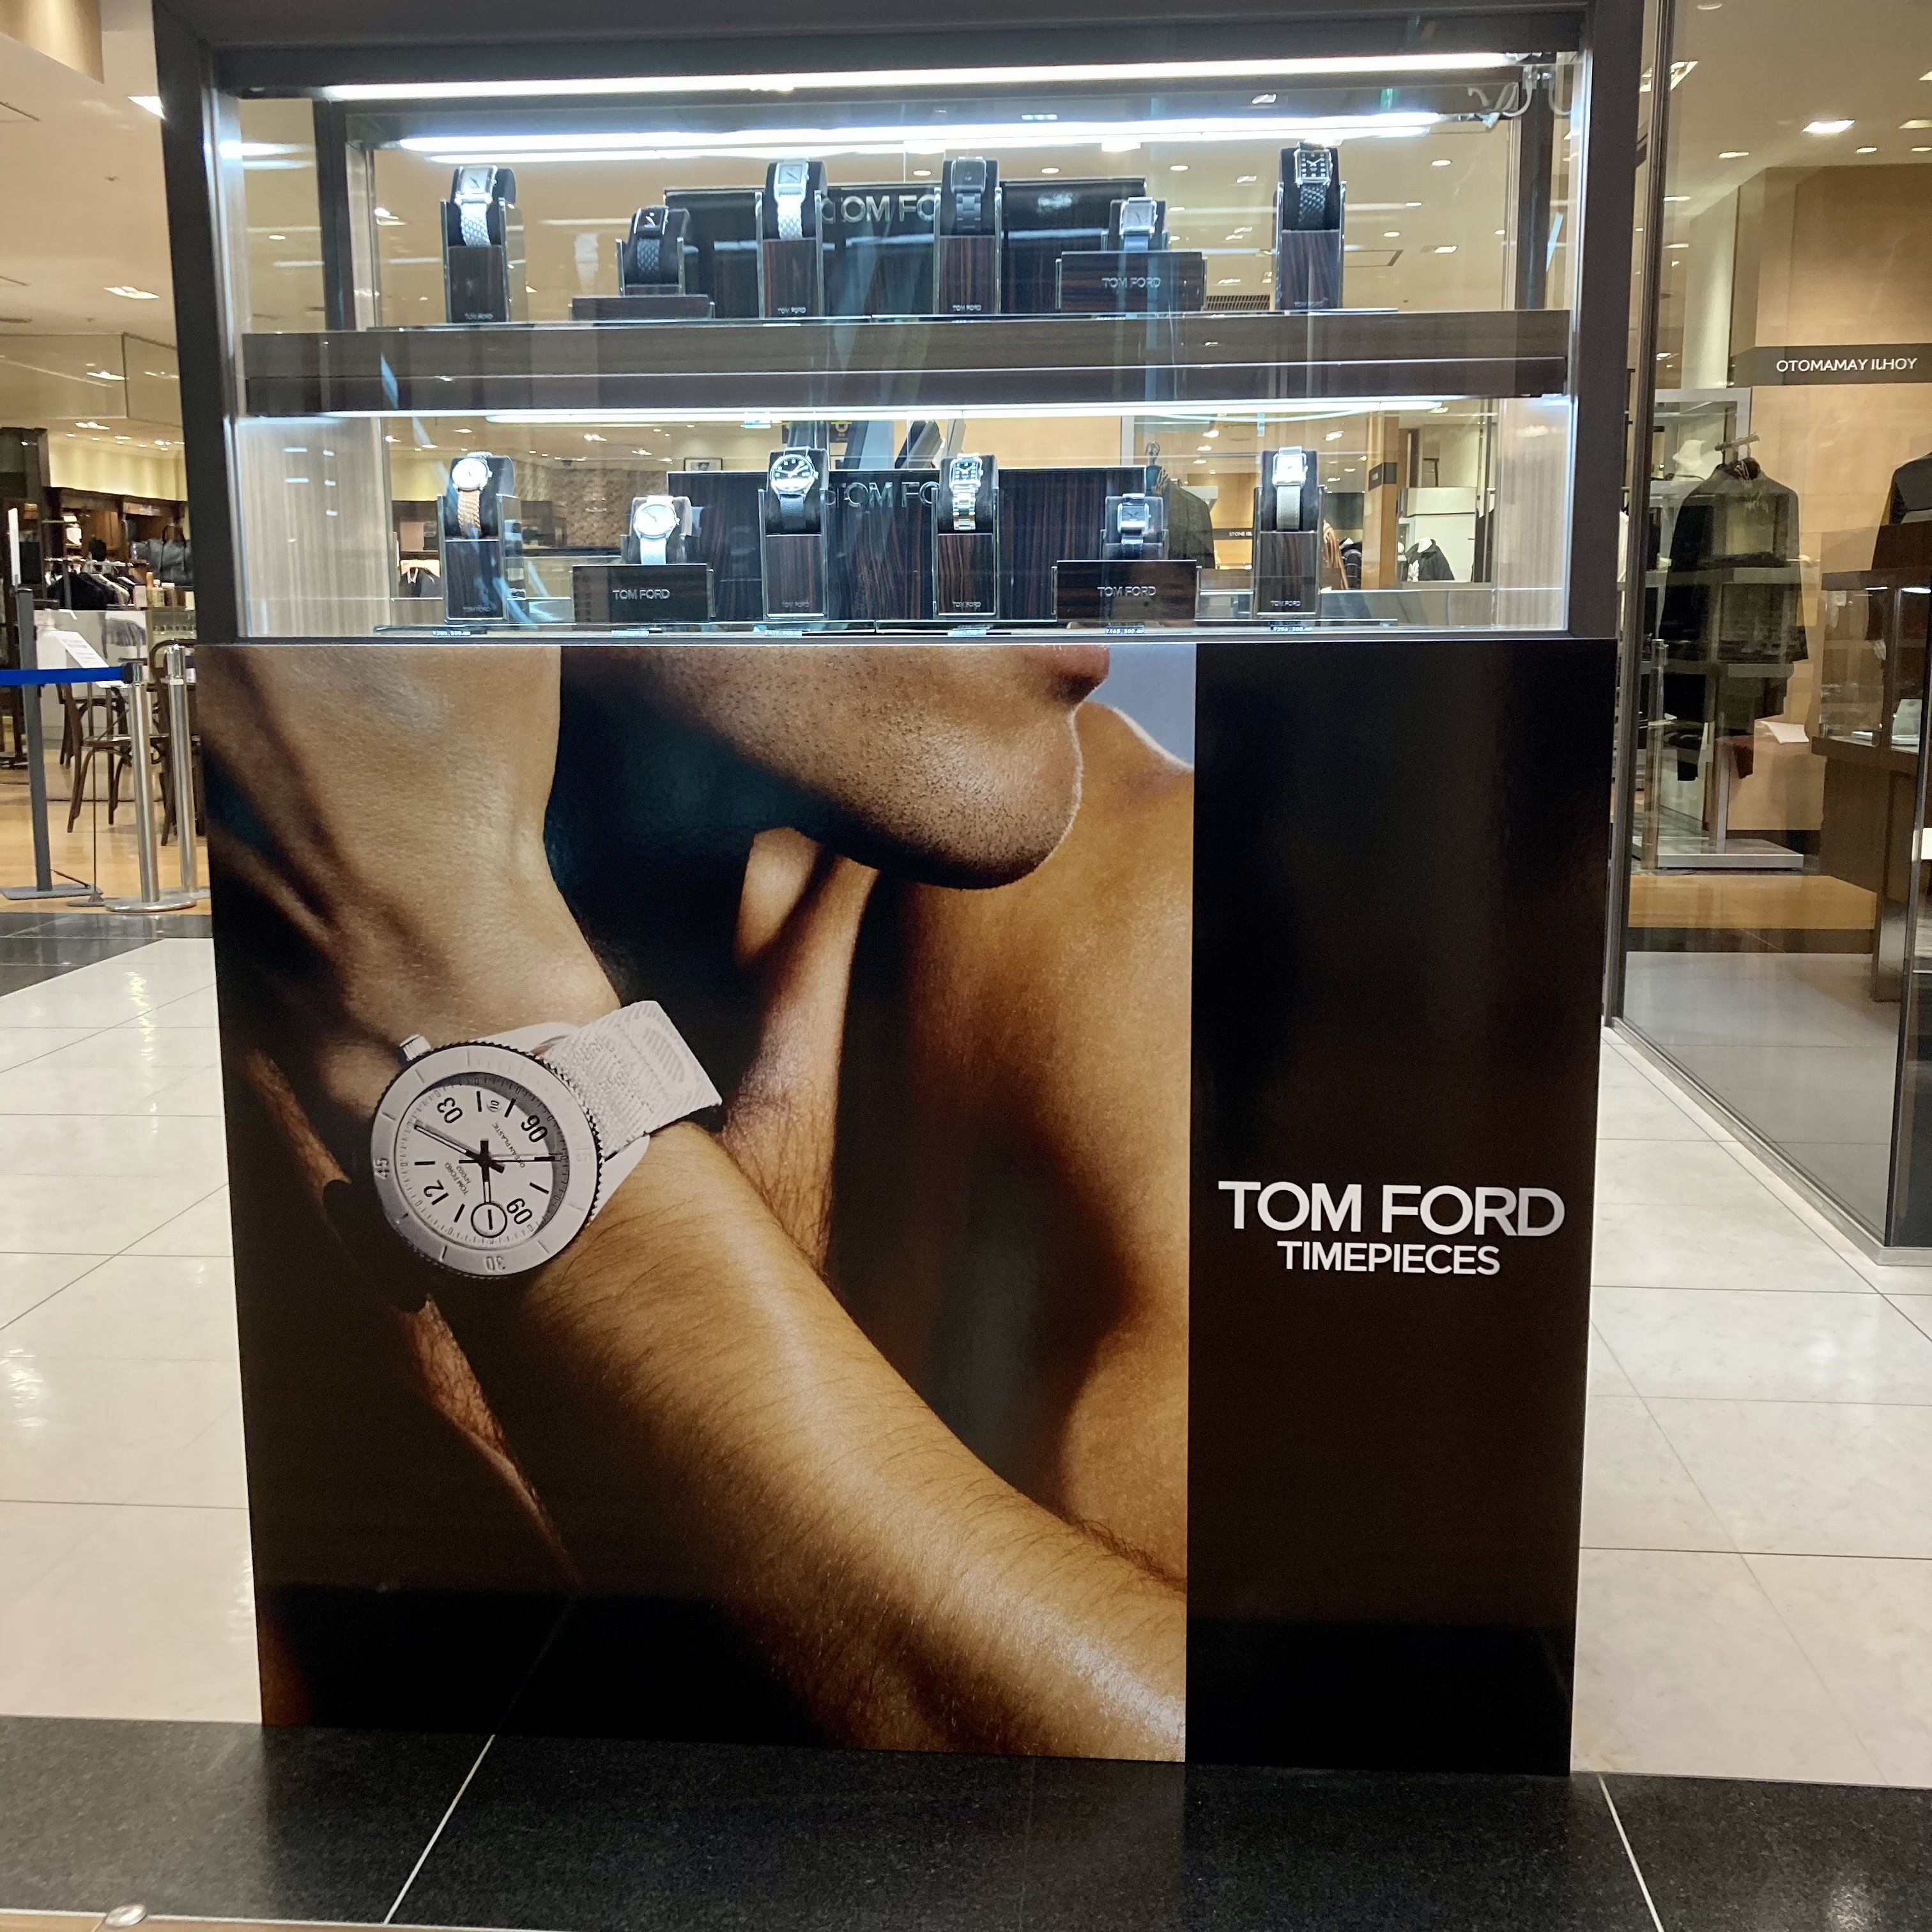 TOM FORD TIMEPIECES 新作発表会！2022 9/1～9/30 